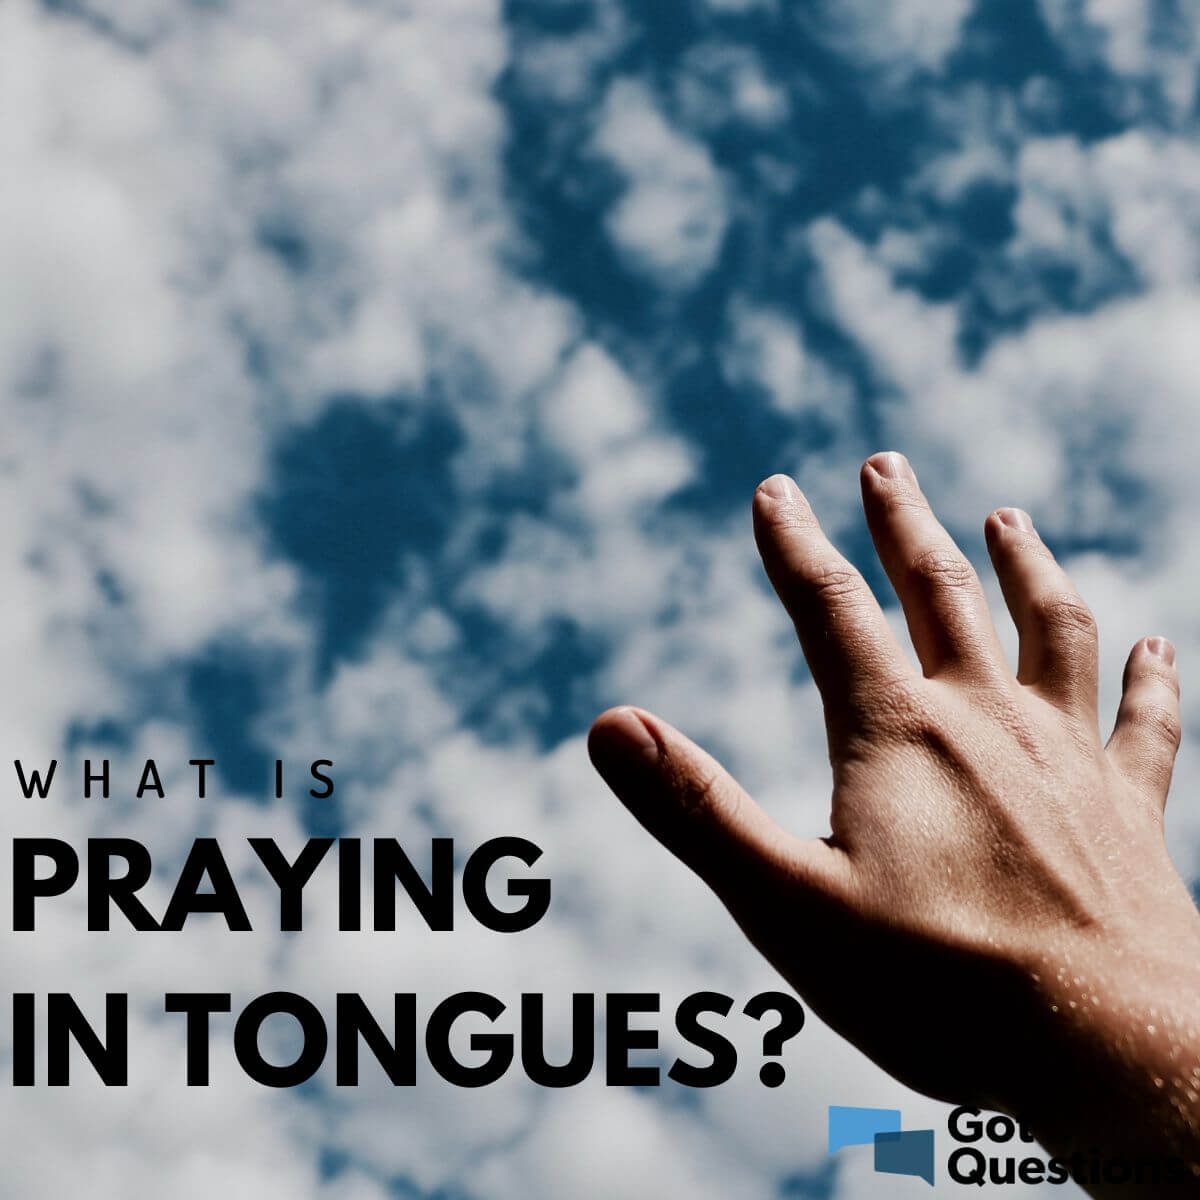 What is praying in tongues? Is praying in tongues a prayer language